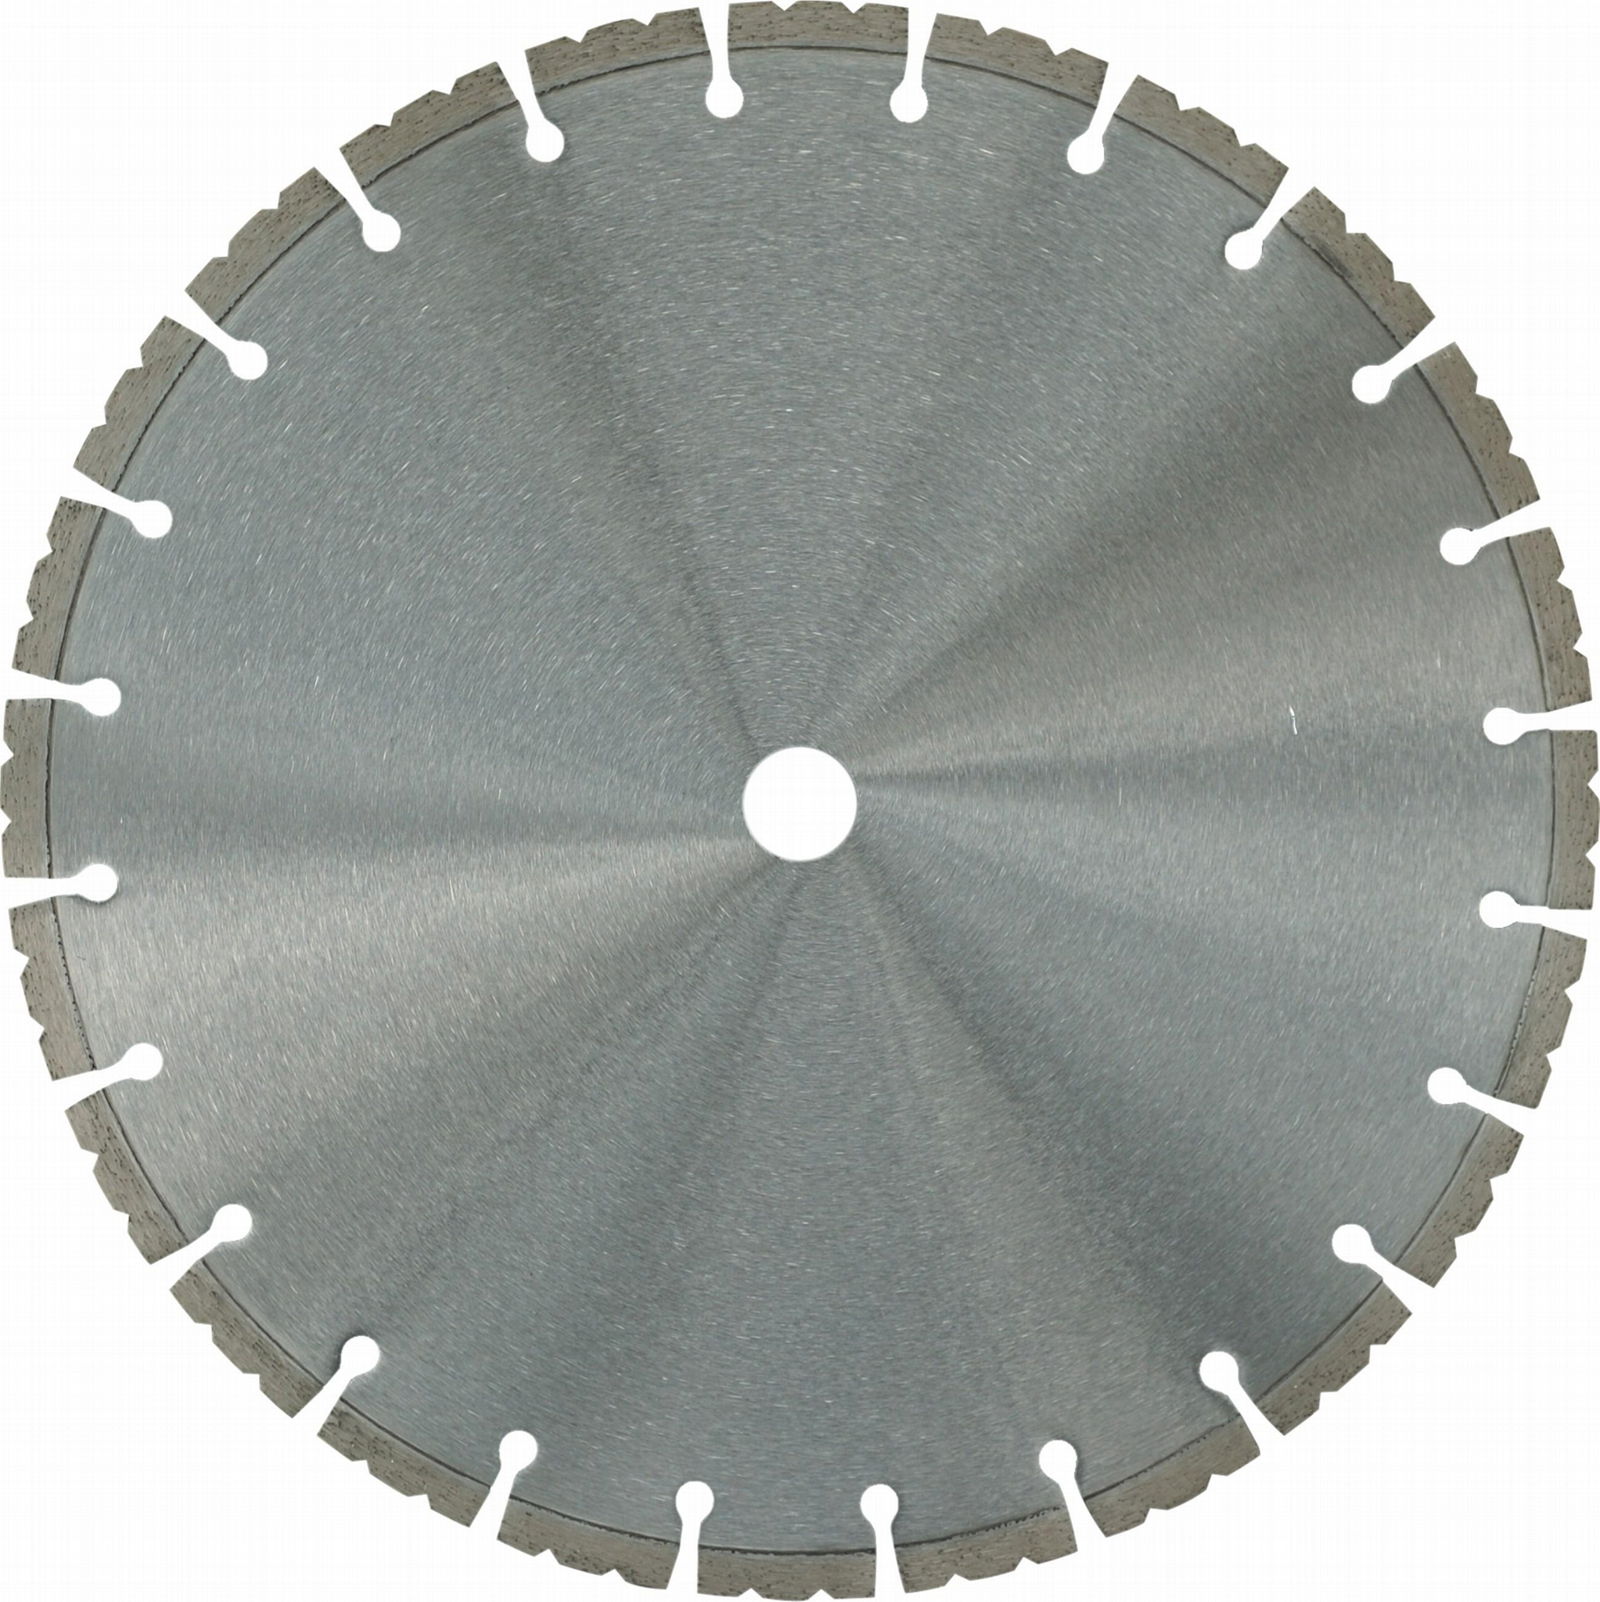 High quality Laser welded saw blade for road